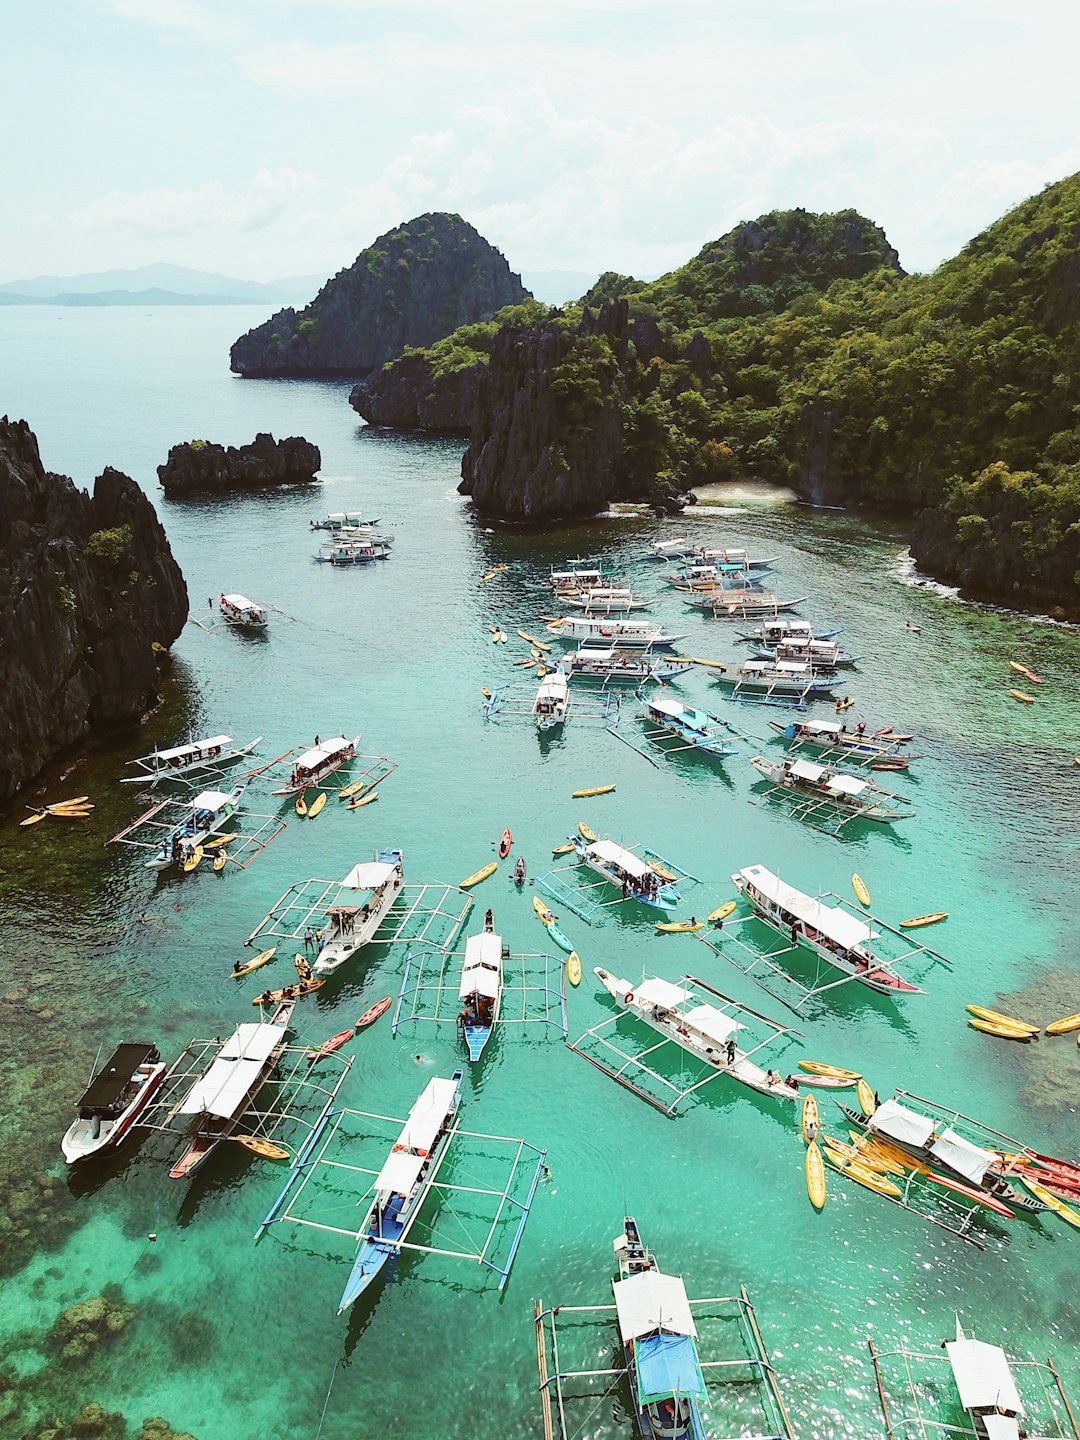 travelers stories about Beach in El Nido, Philippines